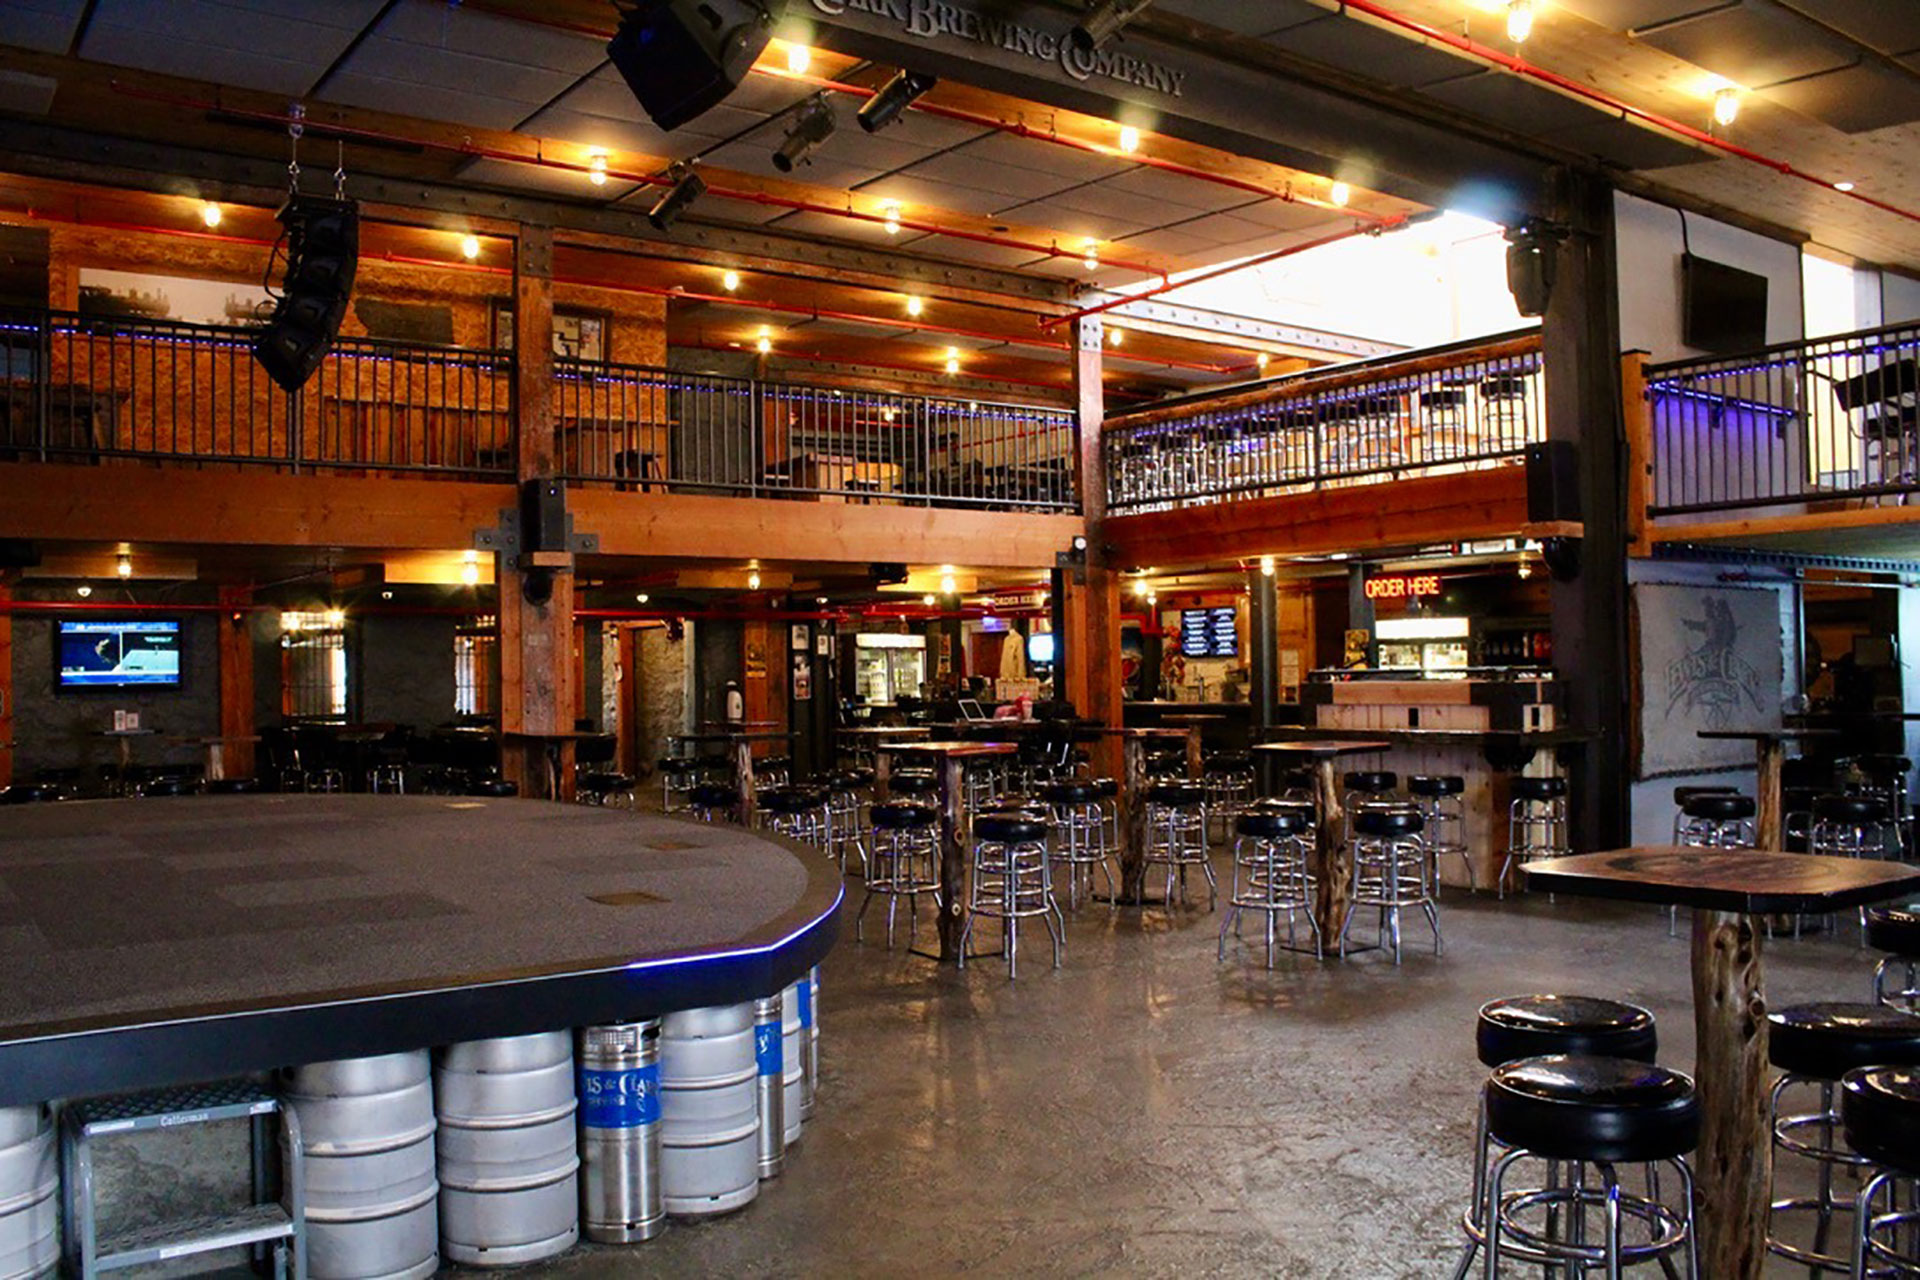 Lewis and Clark Brewery Performance Stage